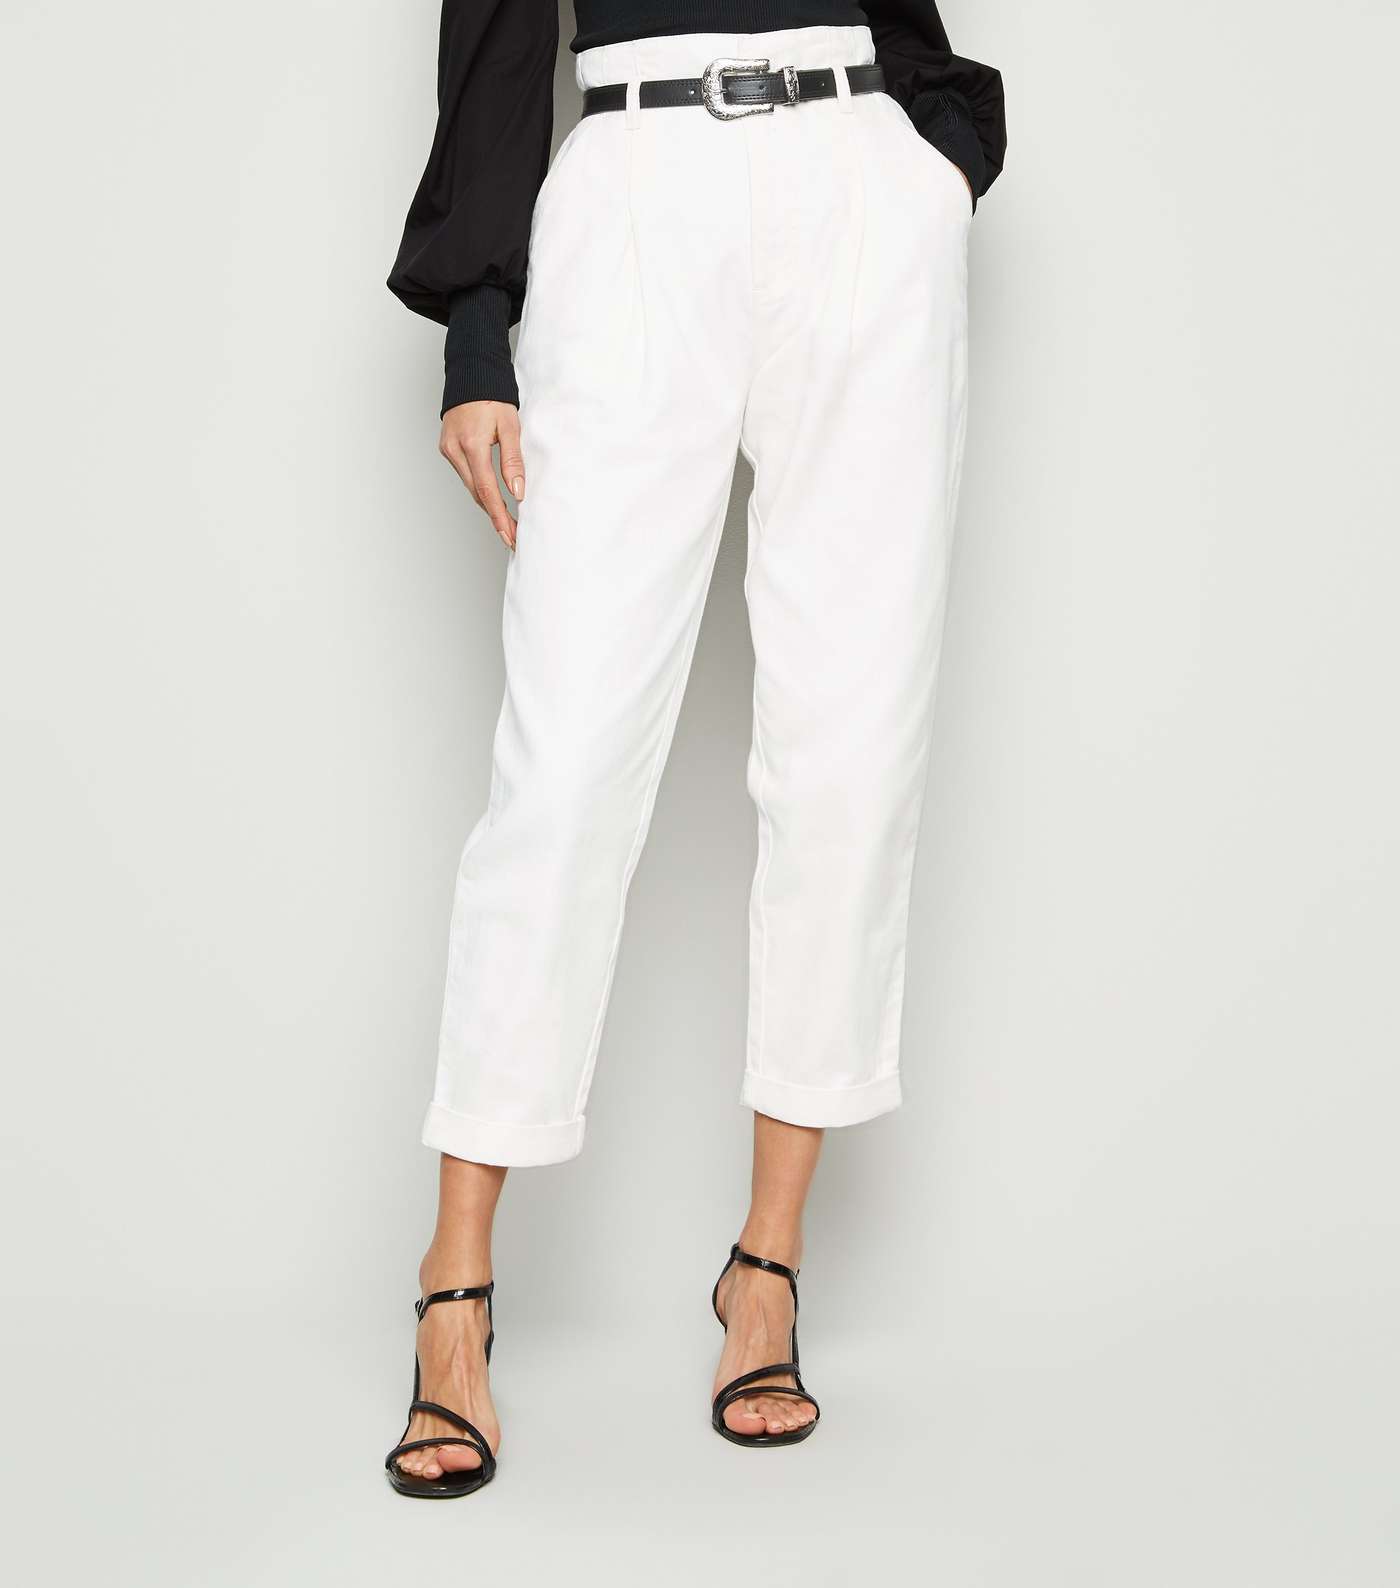 Off White High Waist Belted Jeans Image 2